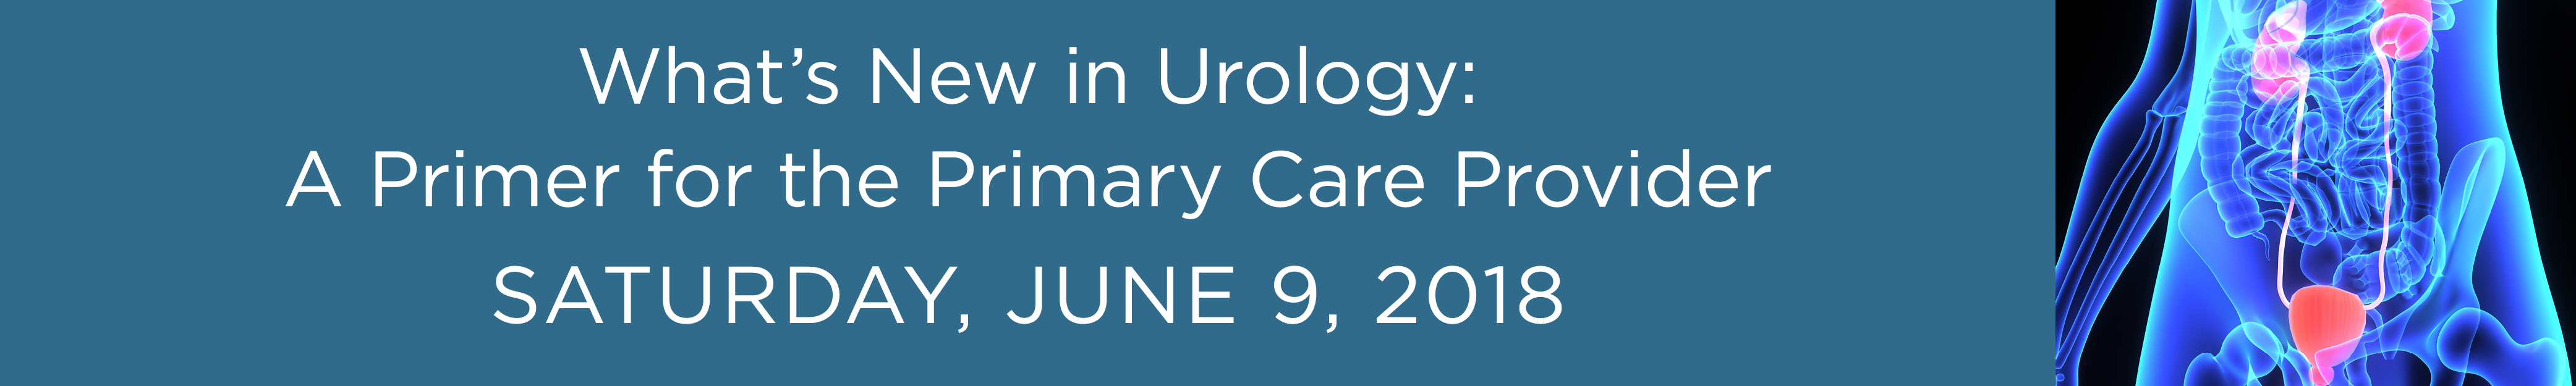 What’s New in Urology: A Primer for the Primary Care Provider Banner